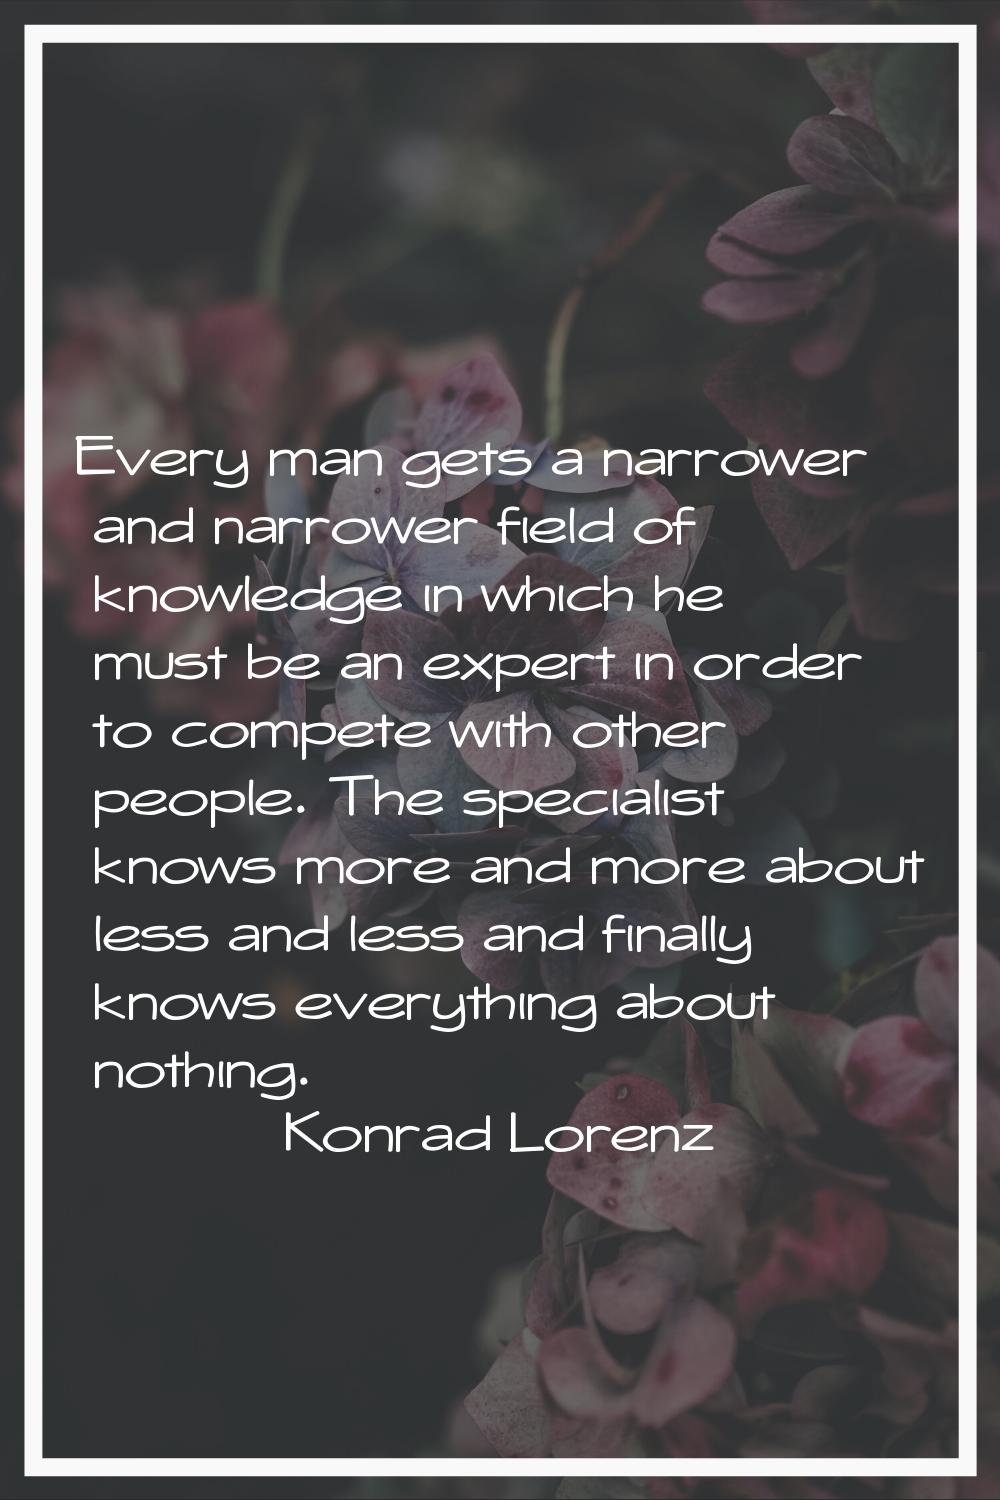 Every man gets a narrower and narrower field of knowledge in which he must be an expert in order to